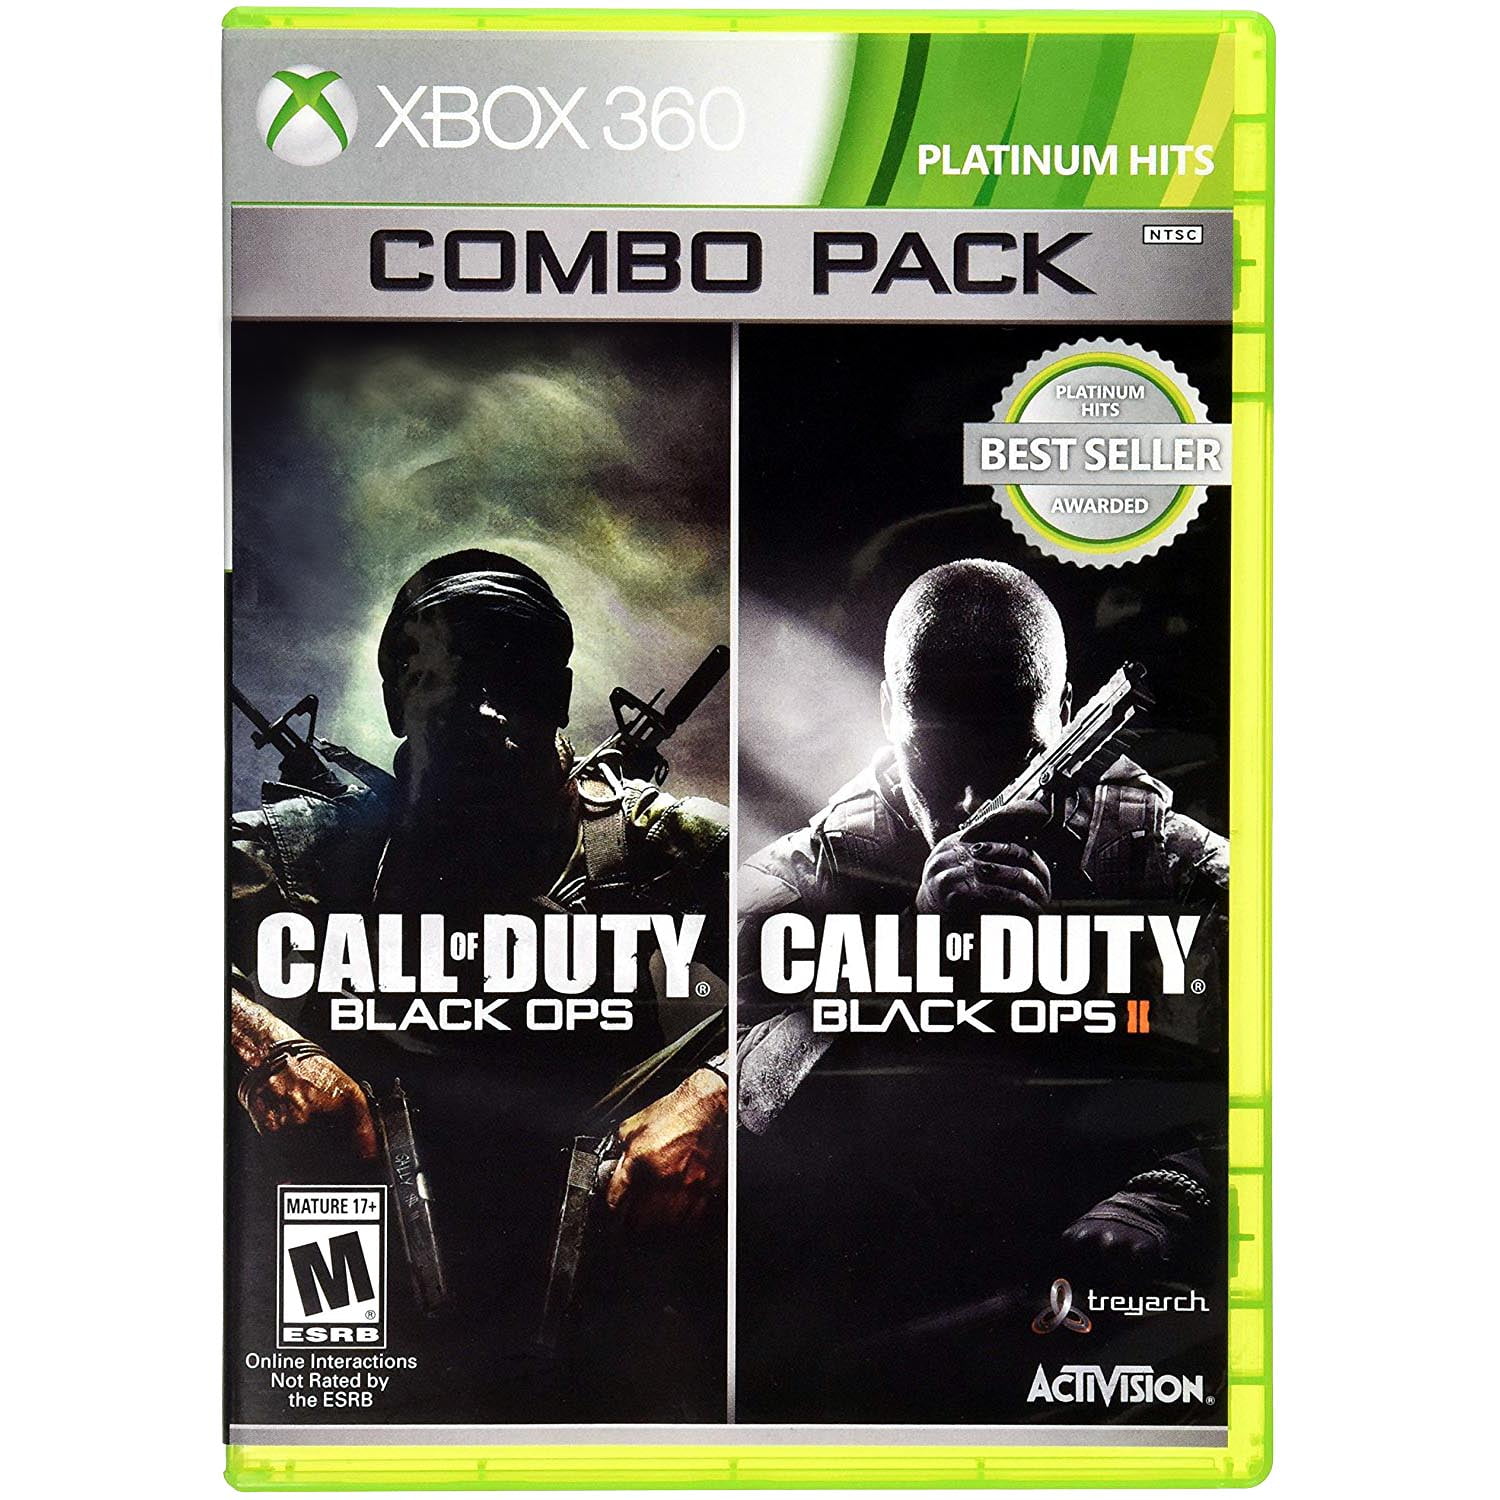 Call of Duty Black Ops 1 & 2 Combo Pack, Activision, Xbox 360, [Physical], 047875881723 -